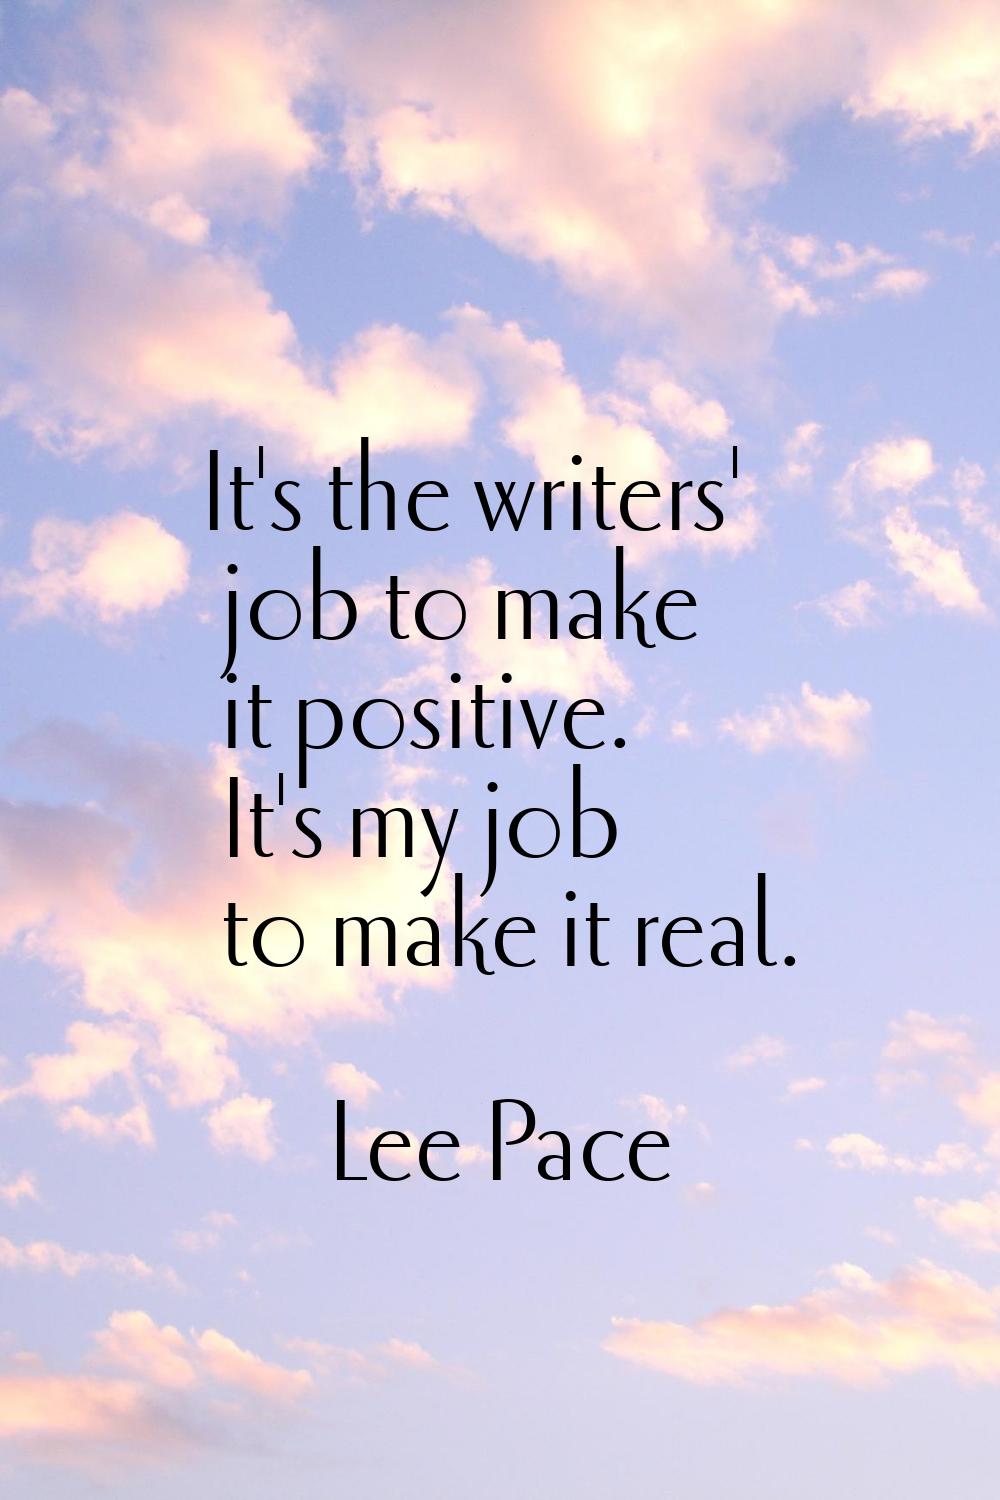 It's the writers' job to make it positive. It's my job to make it real.